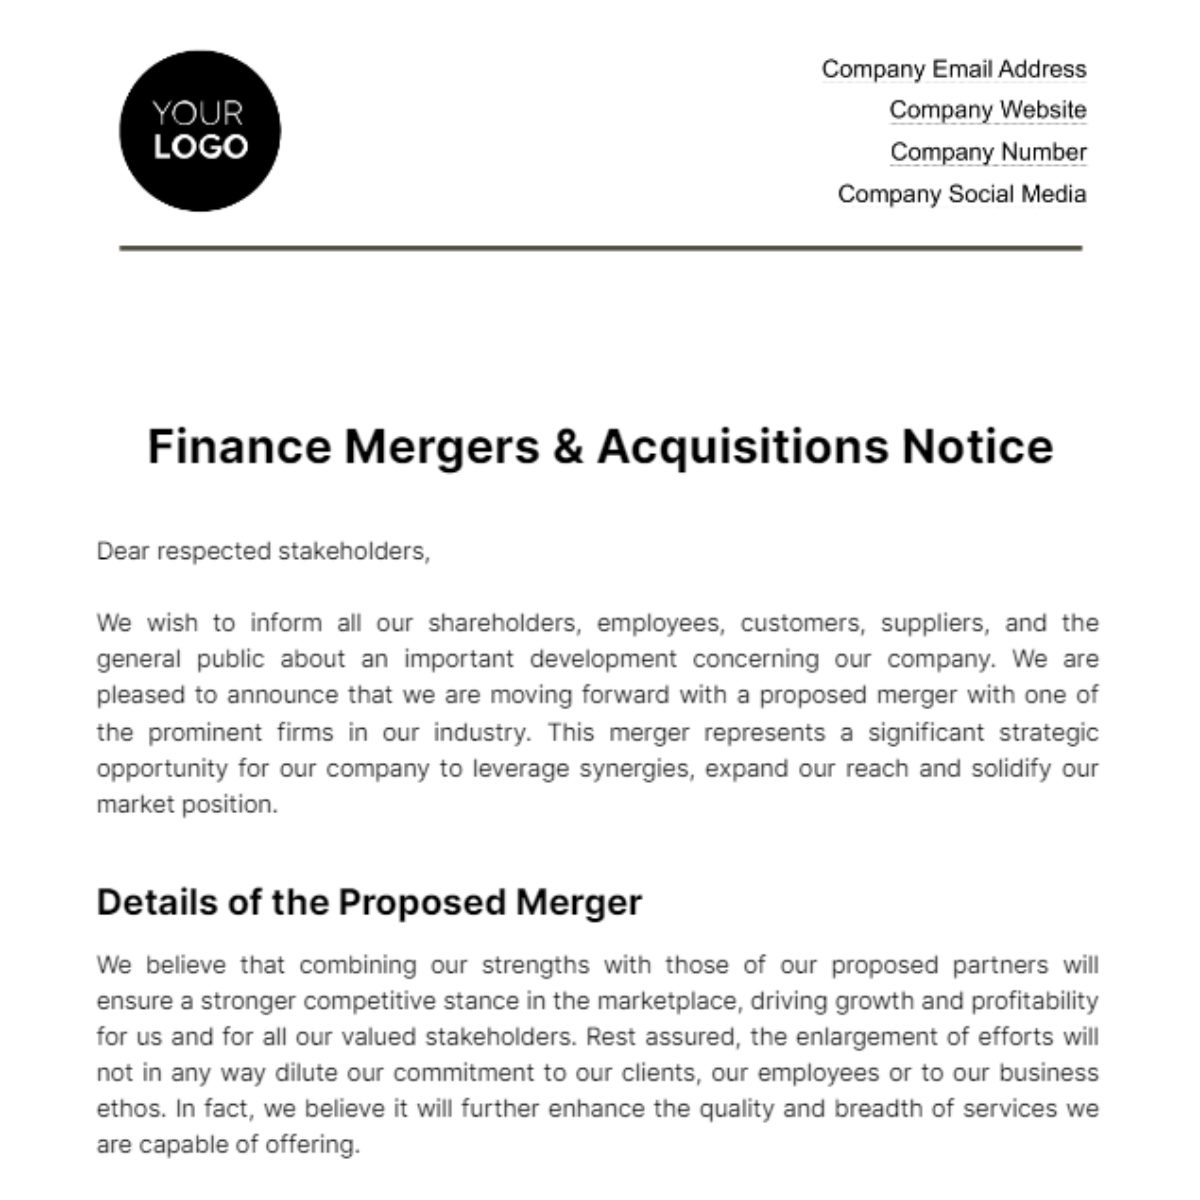 Free Finance Mergers & Acquisitions Notice Template